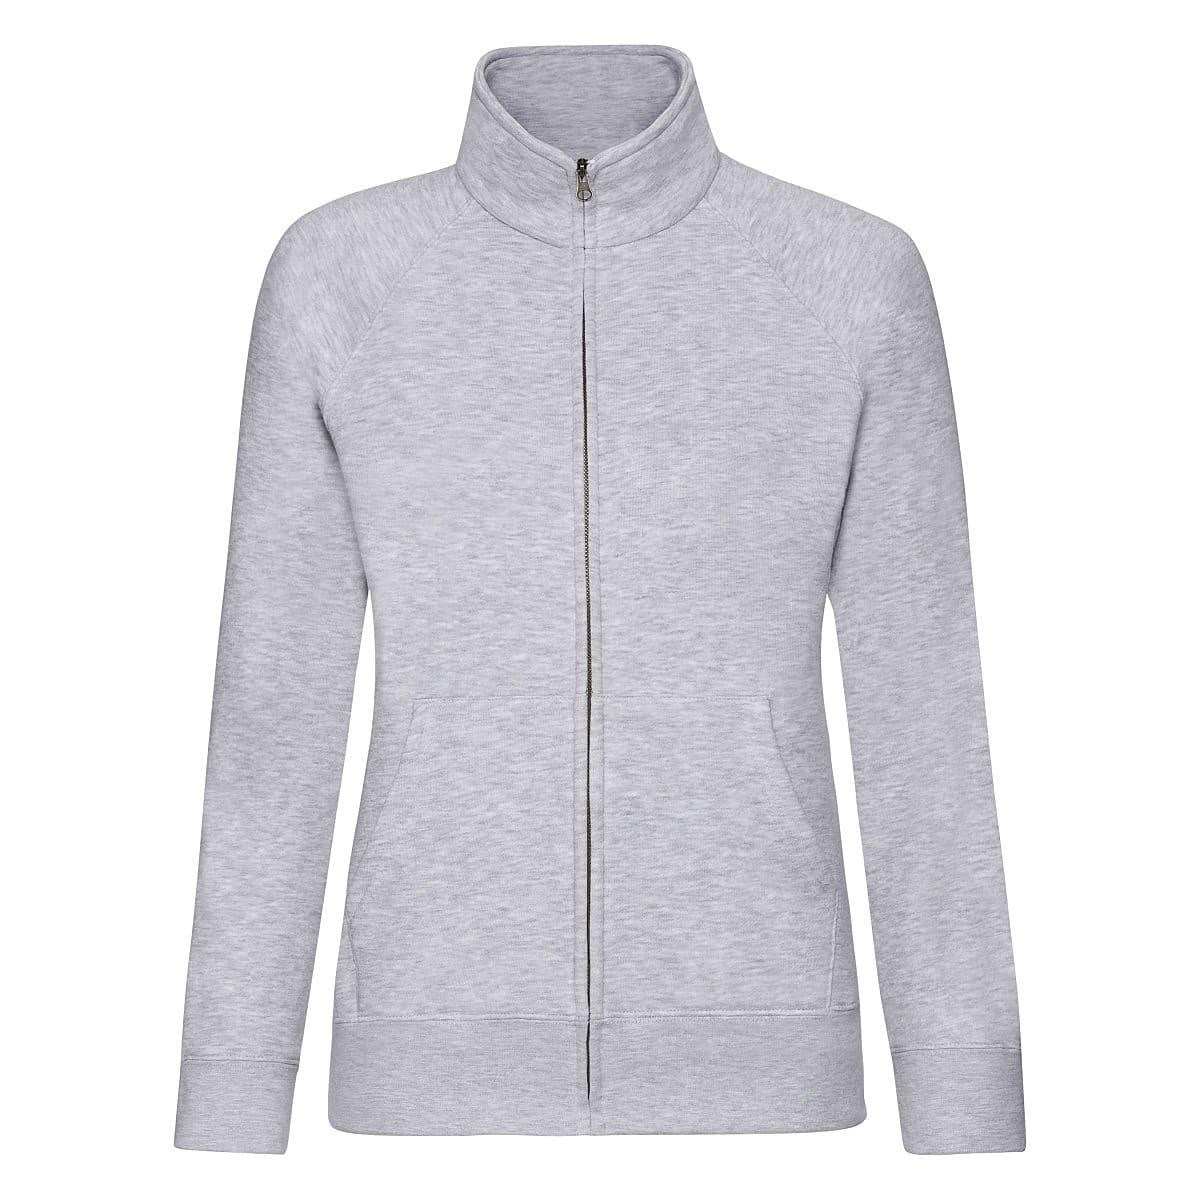 Fruit Of The Loom Lady-Fit Sweat Jacket in Heather Grey (Product Code: 62116)